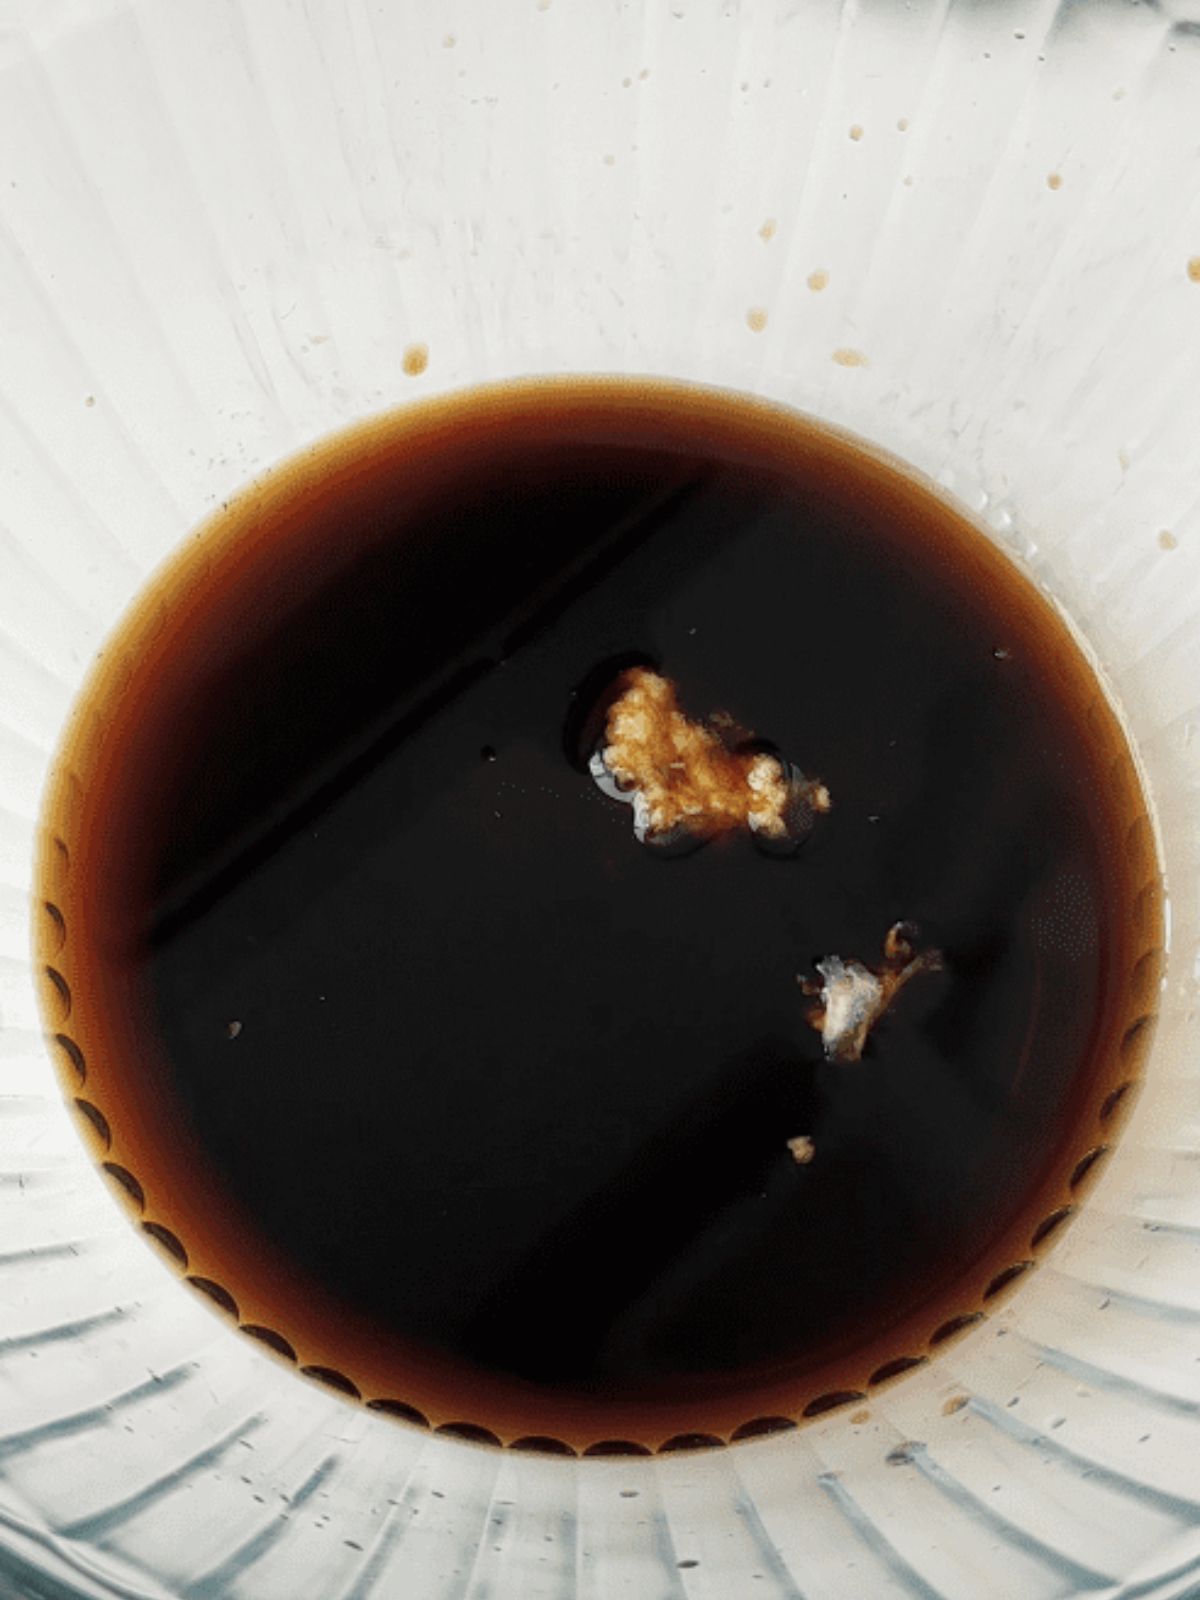 Adding soy sauce and garlic in a bowl.